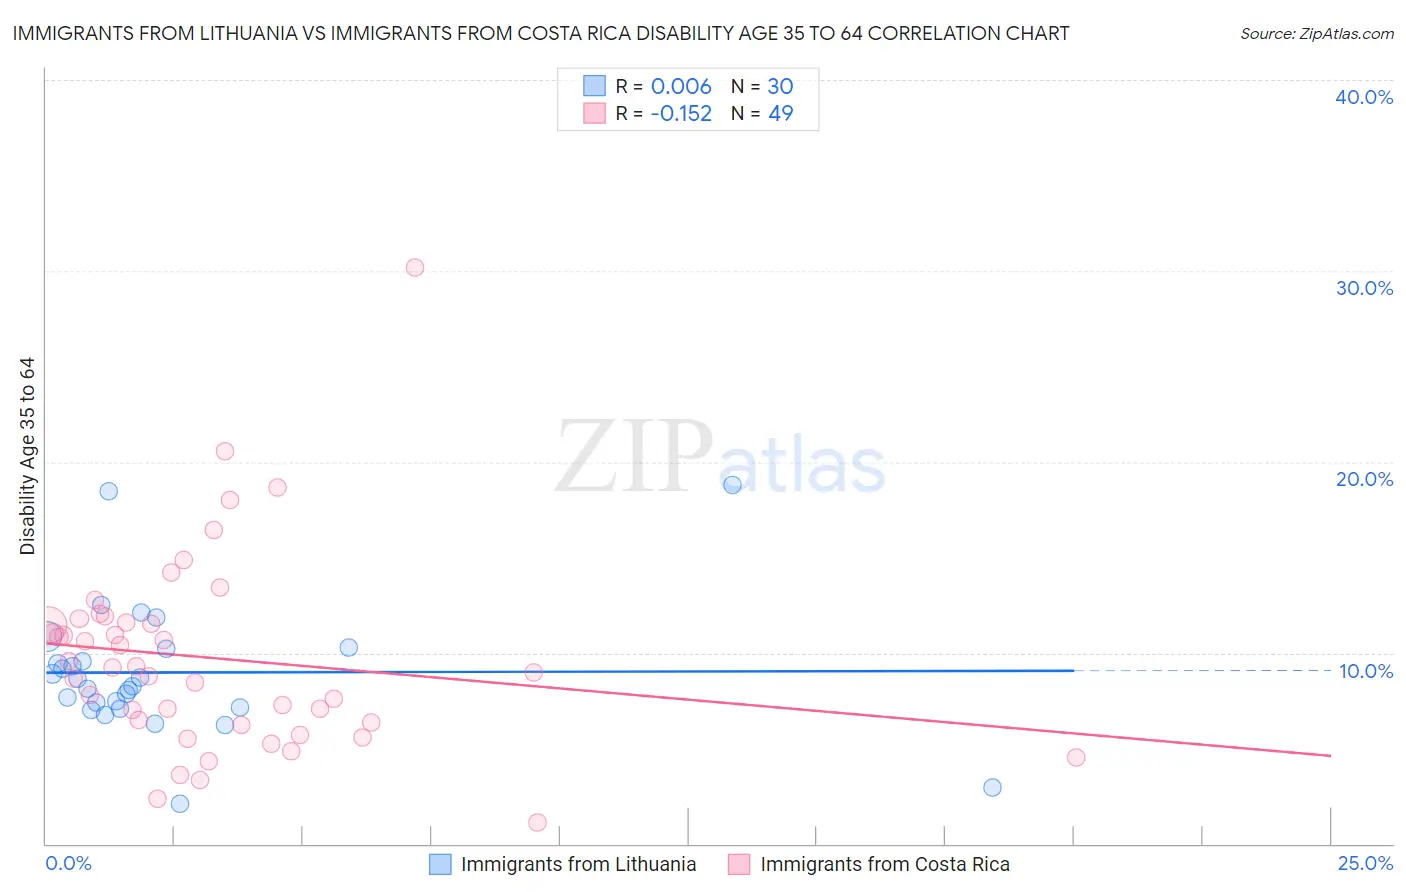 Immigrants from Lithuania vs Immigrants from Costa Rica Disability Age 35 to 64